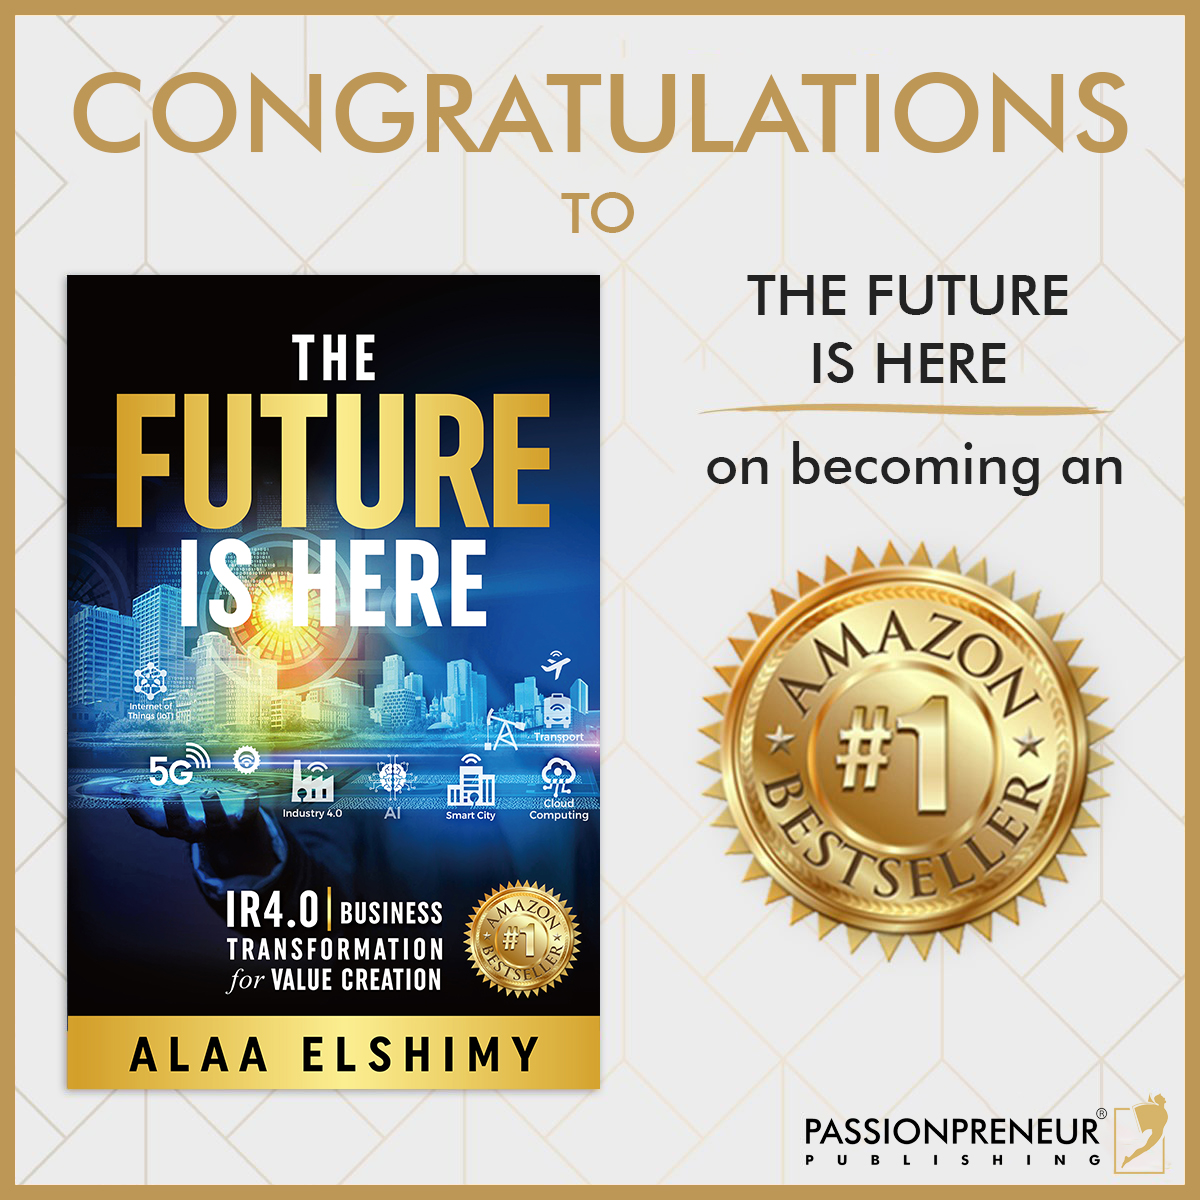 Passionpreneur Publishing is proud to announce that  'The Future Is Here' by Dr. Alaa Elshimy has hit the #1 Bestseller rank on Amazon.

#AlaaElshimy #TheFutureIsHere #Industry #IndustryRevolution #IndustryRevolution4.0 #IR4.0 #BusinessTransformation